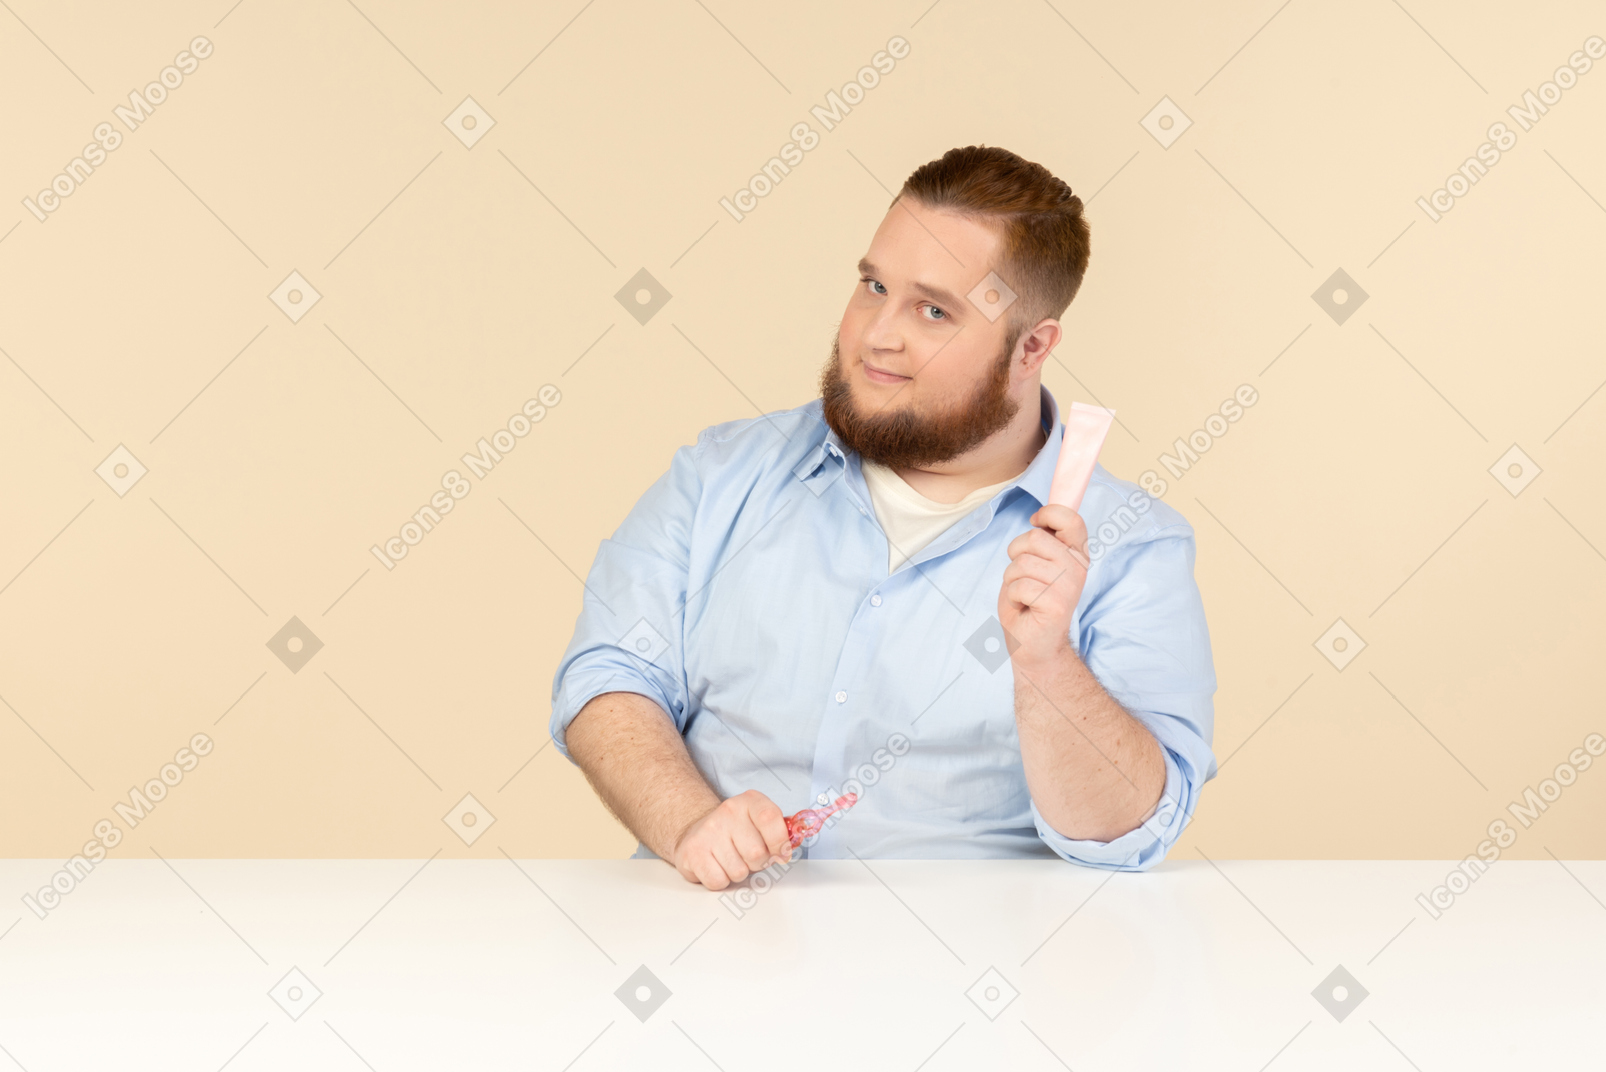 Big man sitting at the table and holding toothpaste and toothbrush